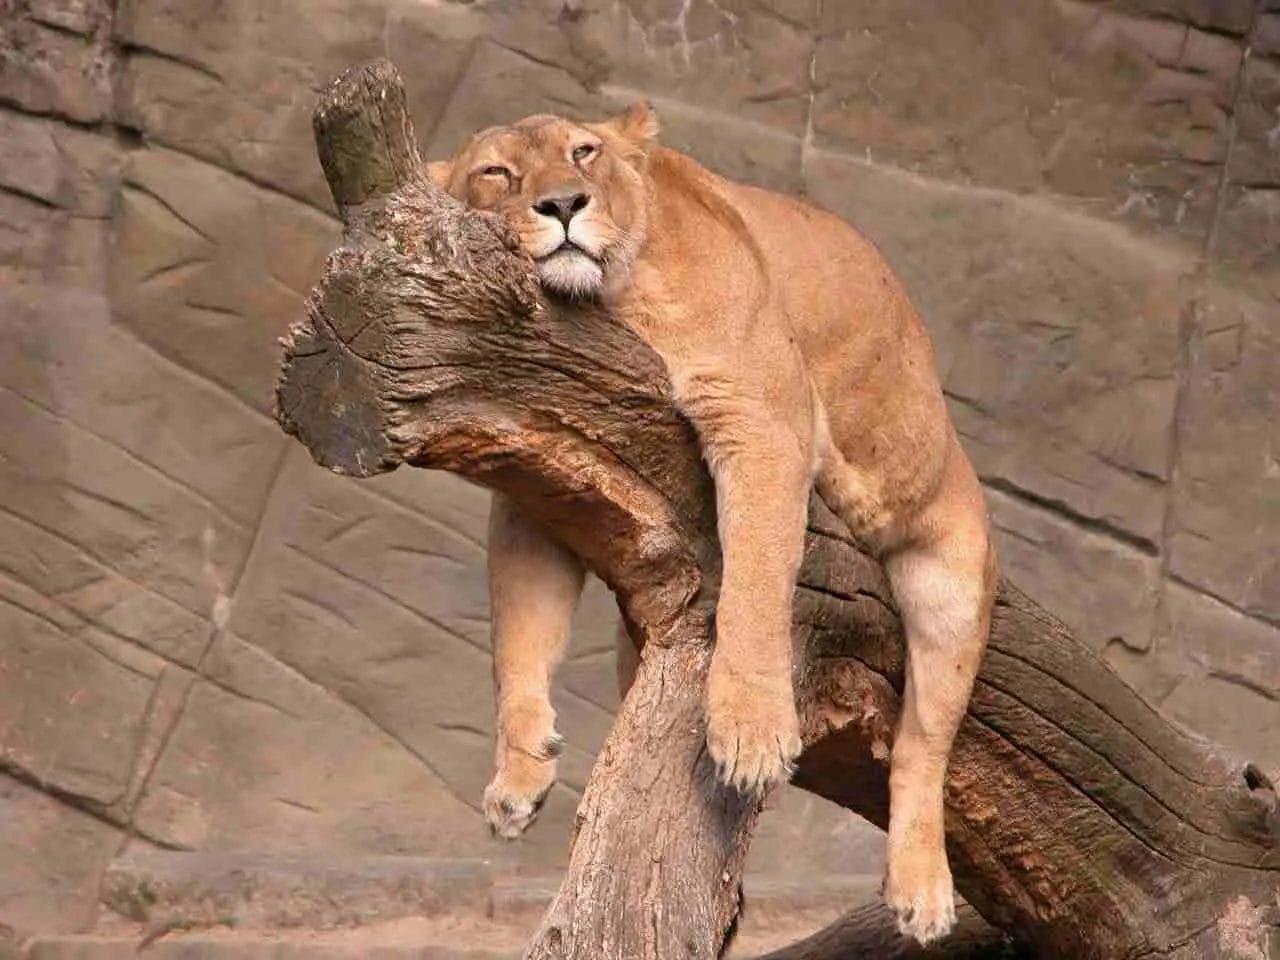 Are Lions Lazy?